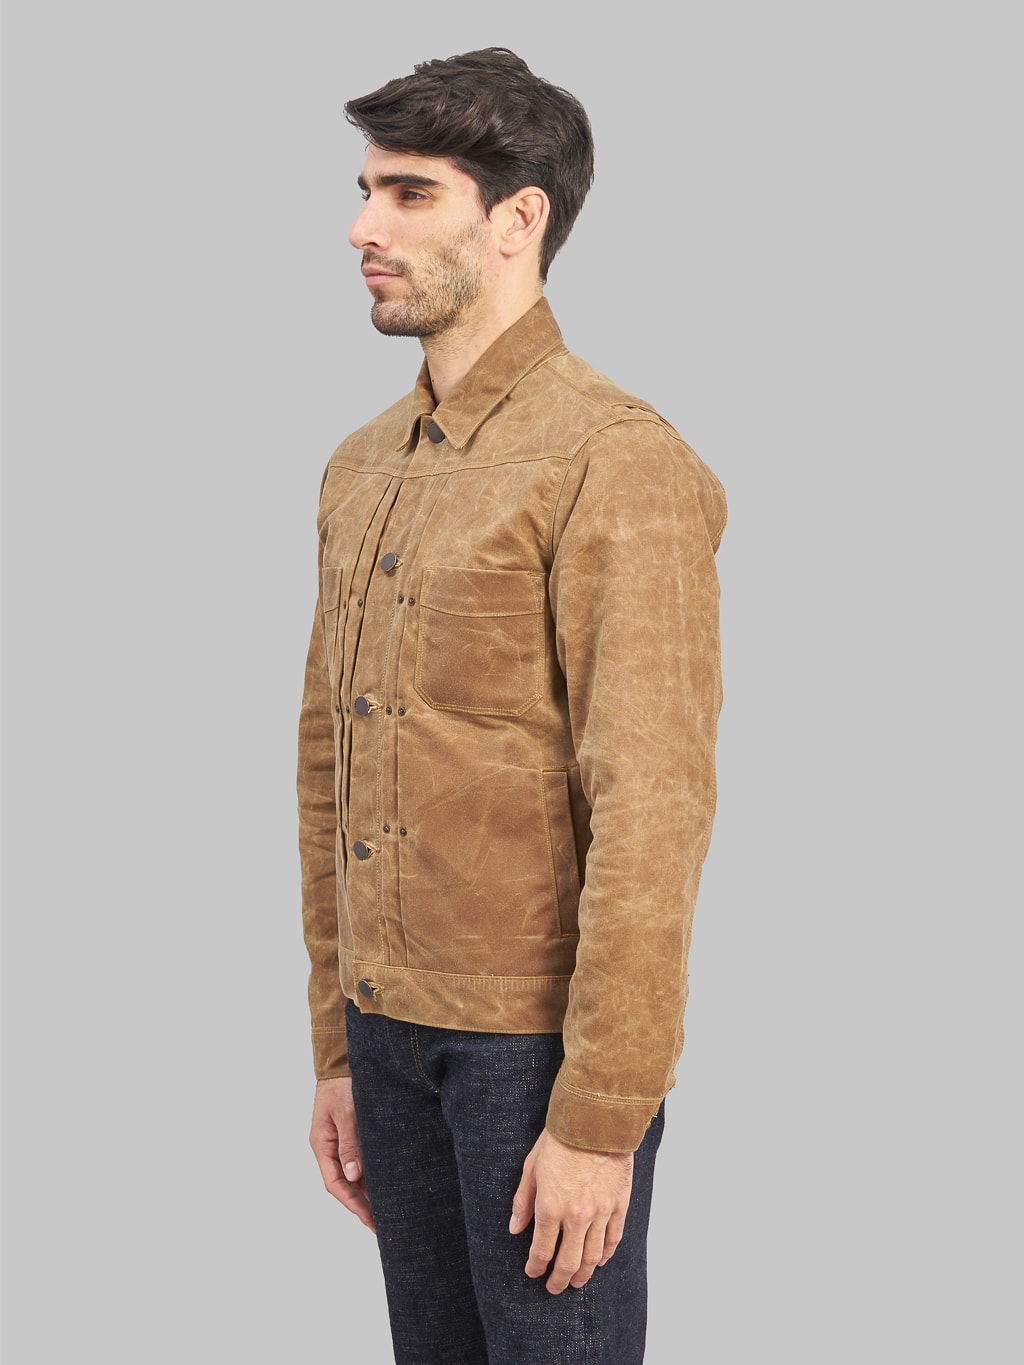 Freenote Cloth Riders Jacket Waxed Canvas Rust model side fit